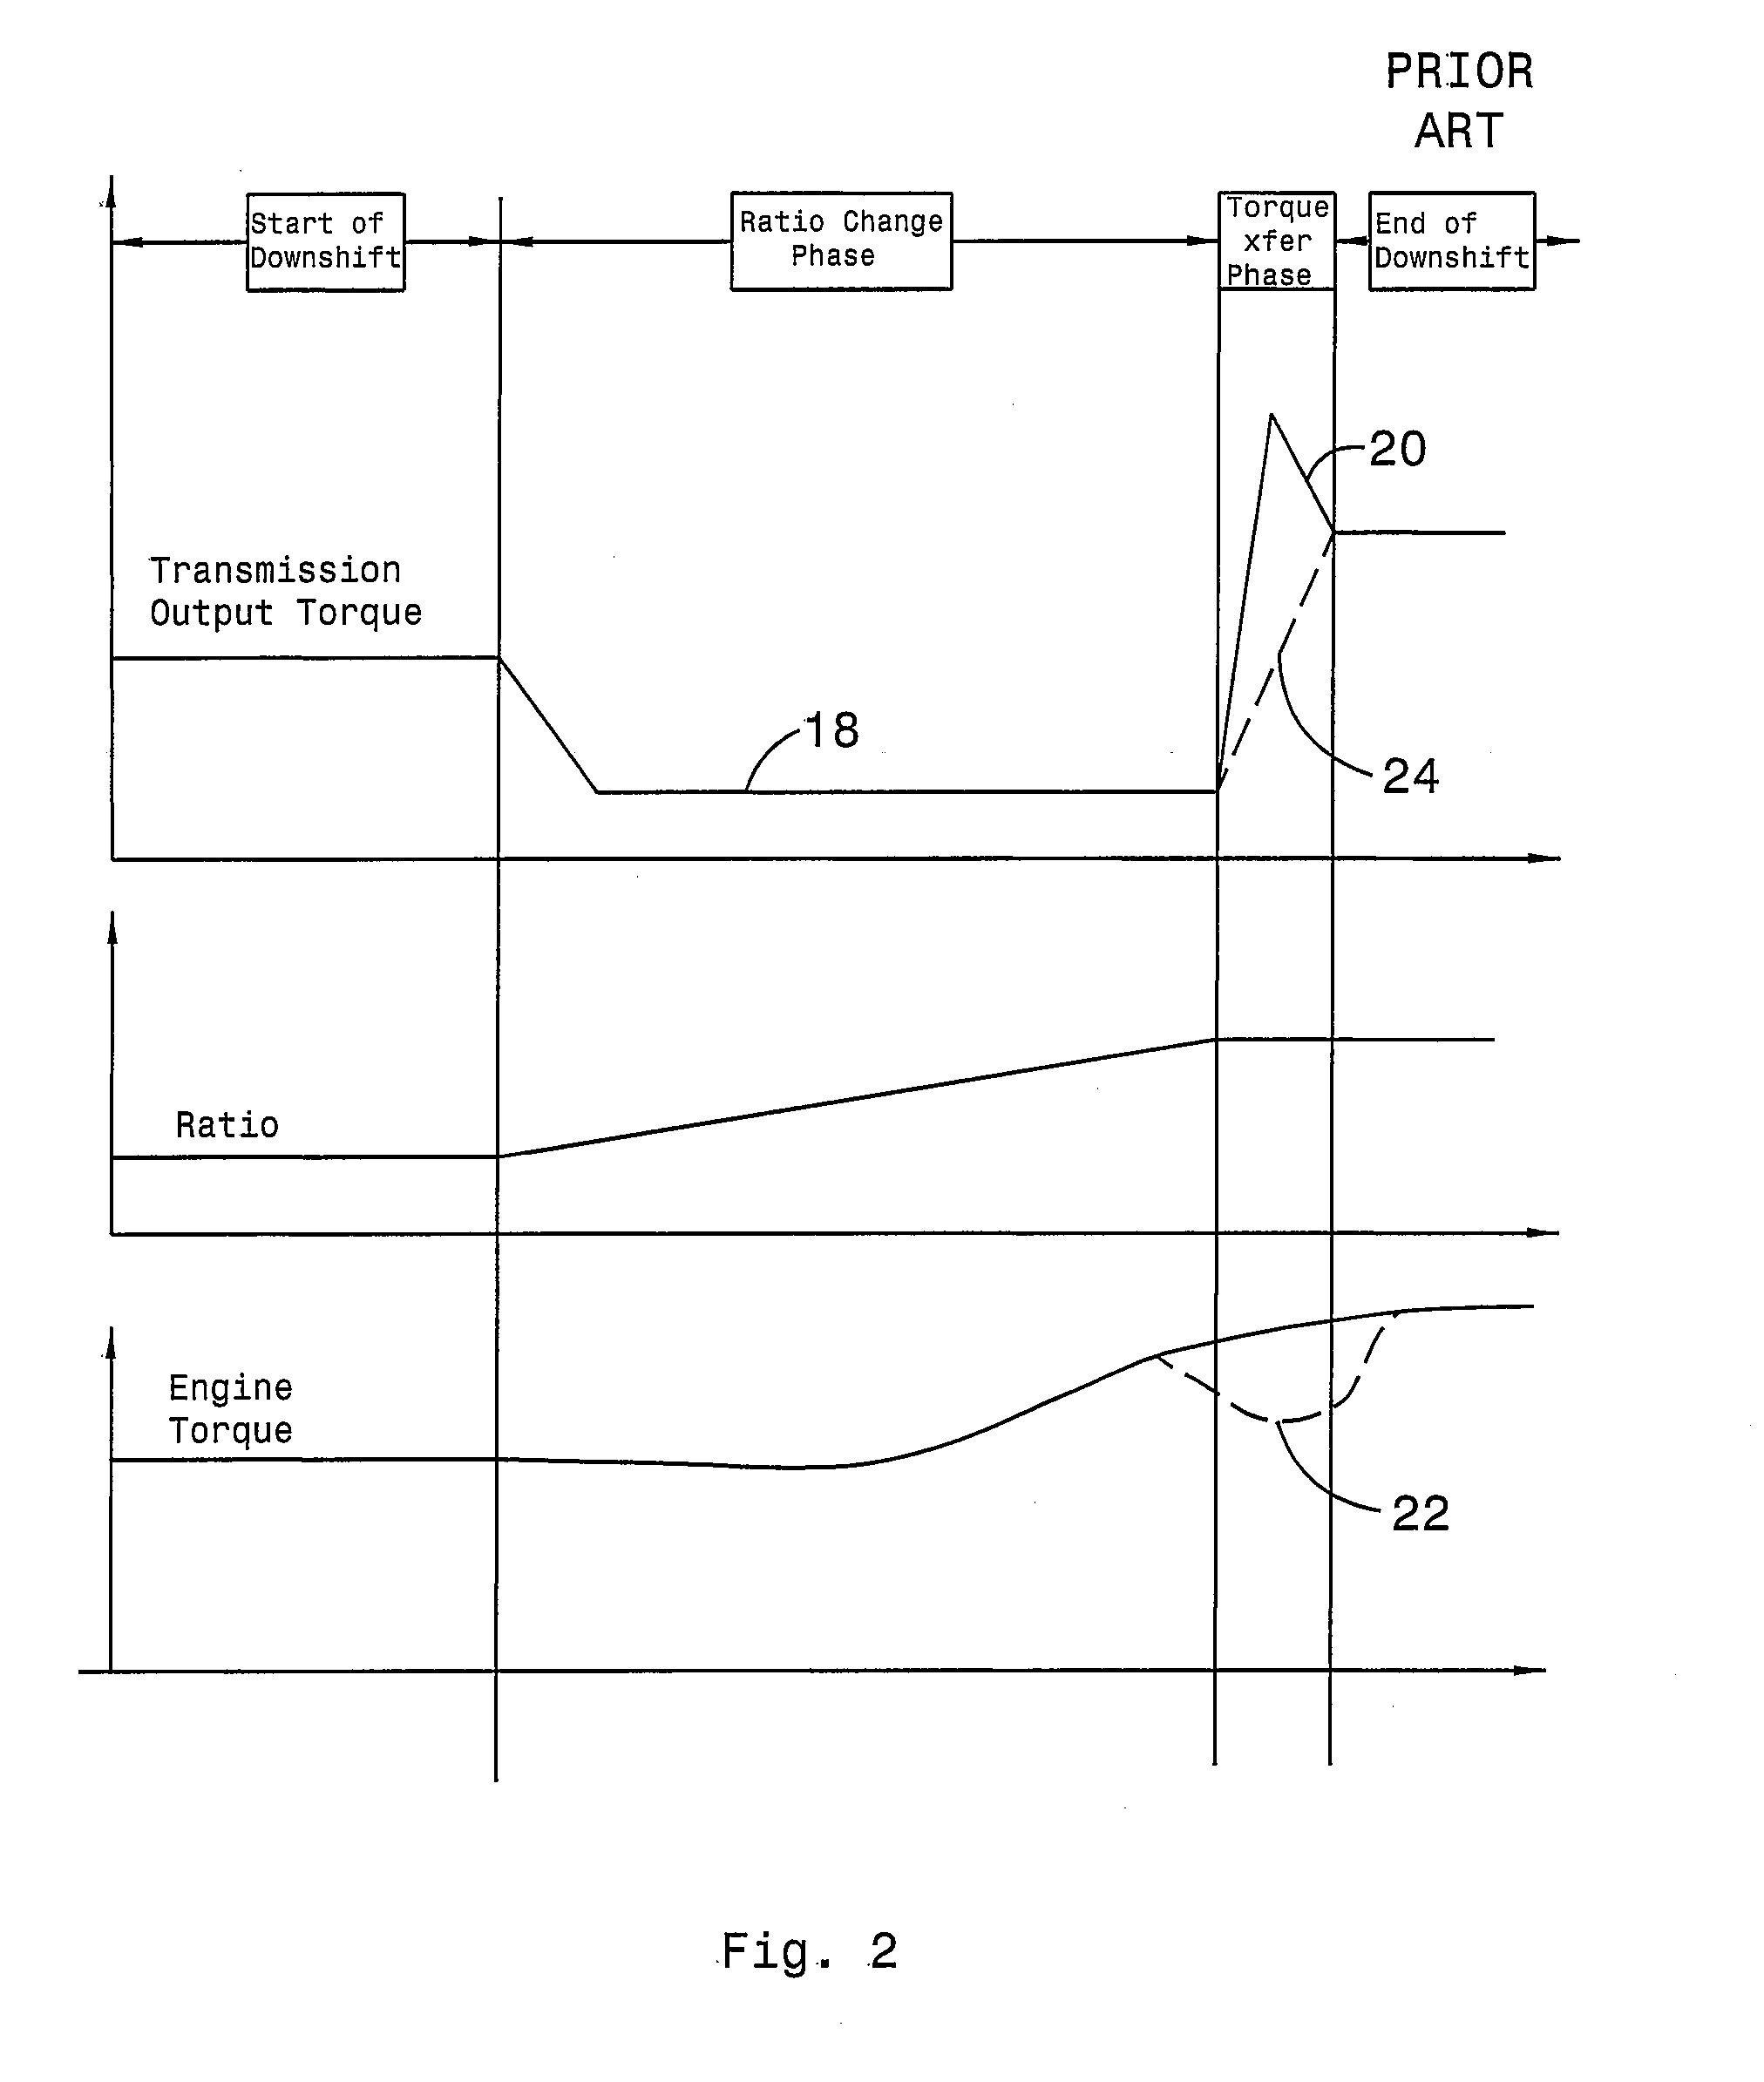 Torque Modulation Control of a Hybrid Electric Vehicle